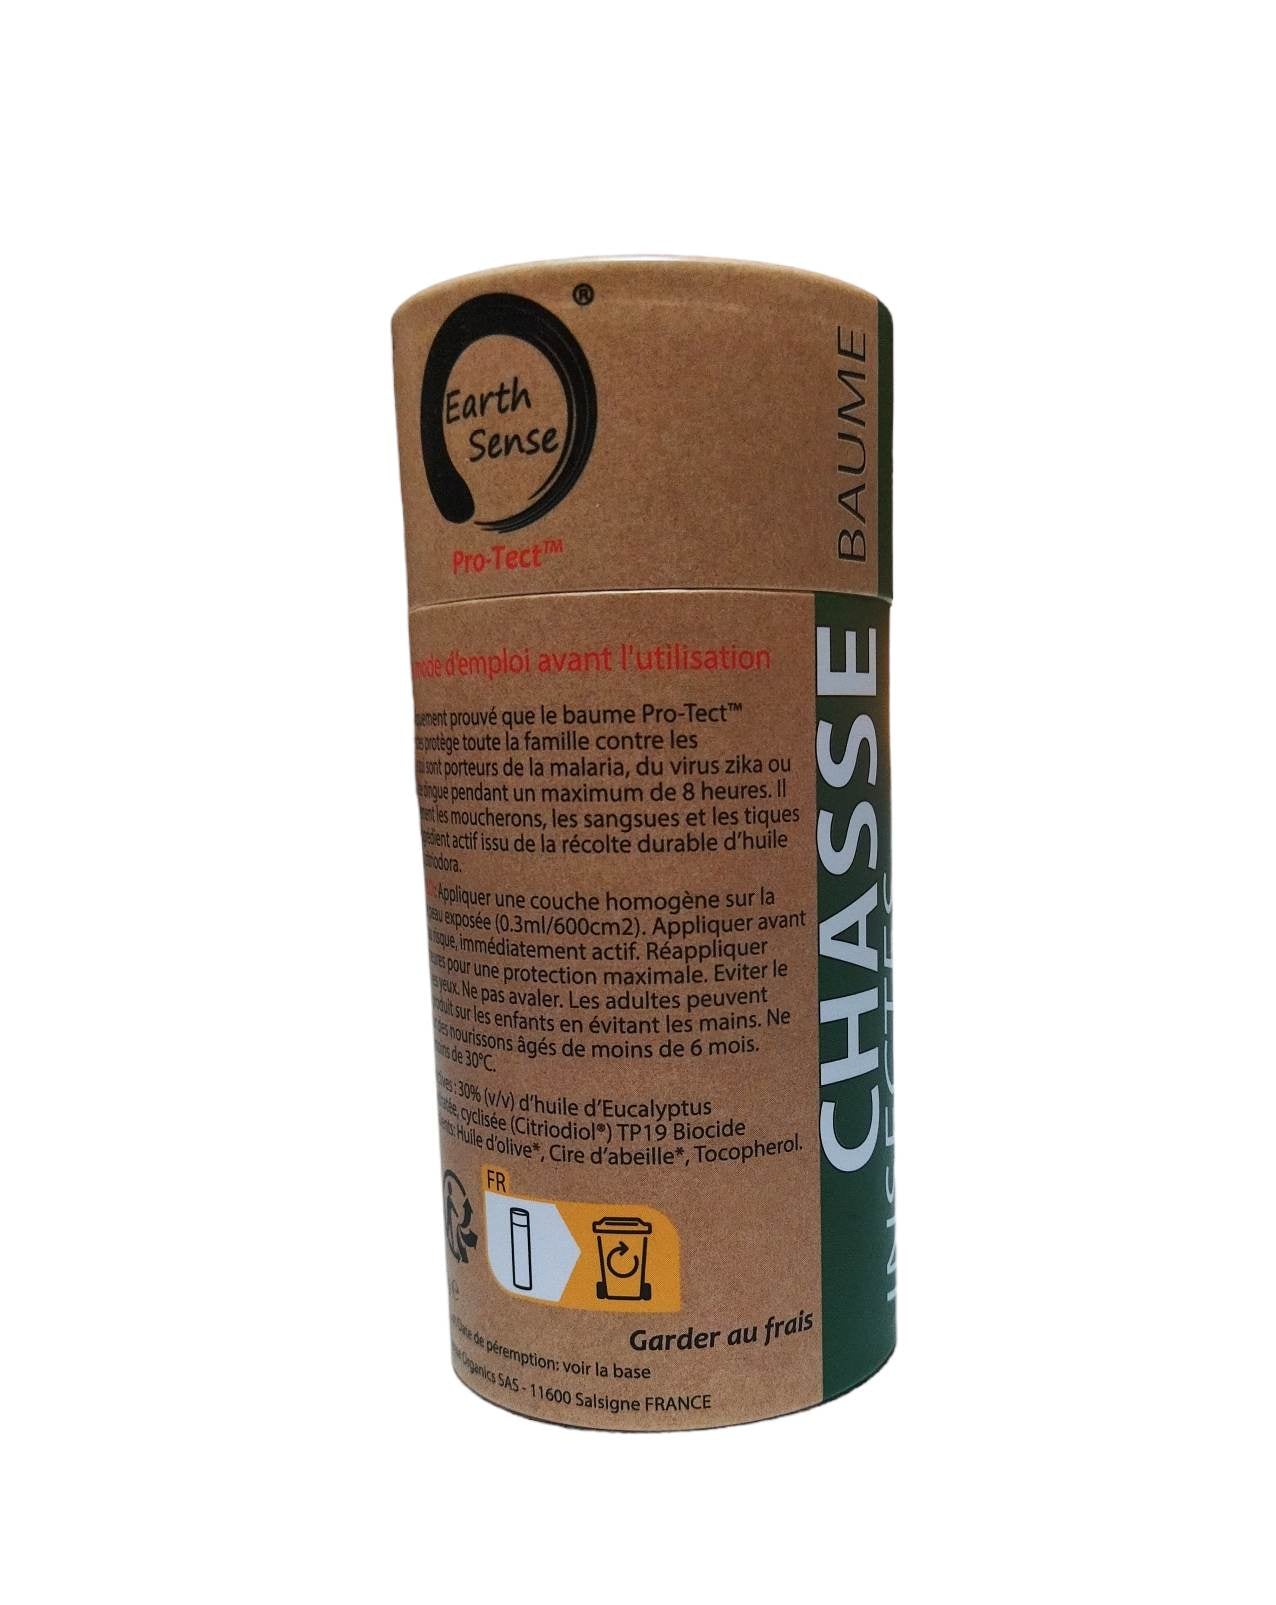 Pro-Tect Chasse Insectes Insect Repellent Balm 100ml - Earthsenseorganics